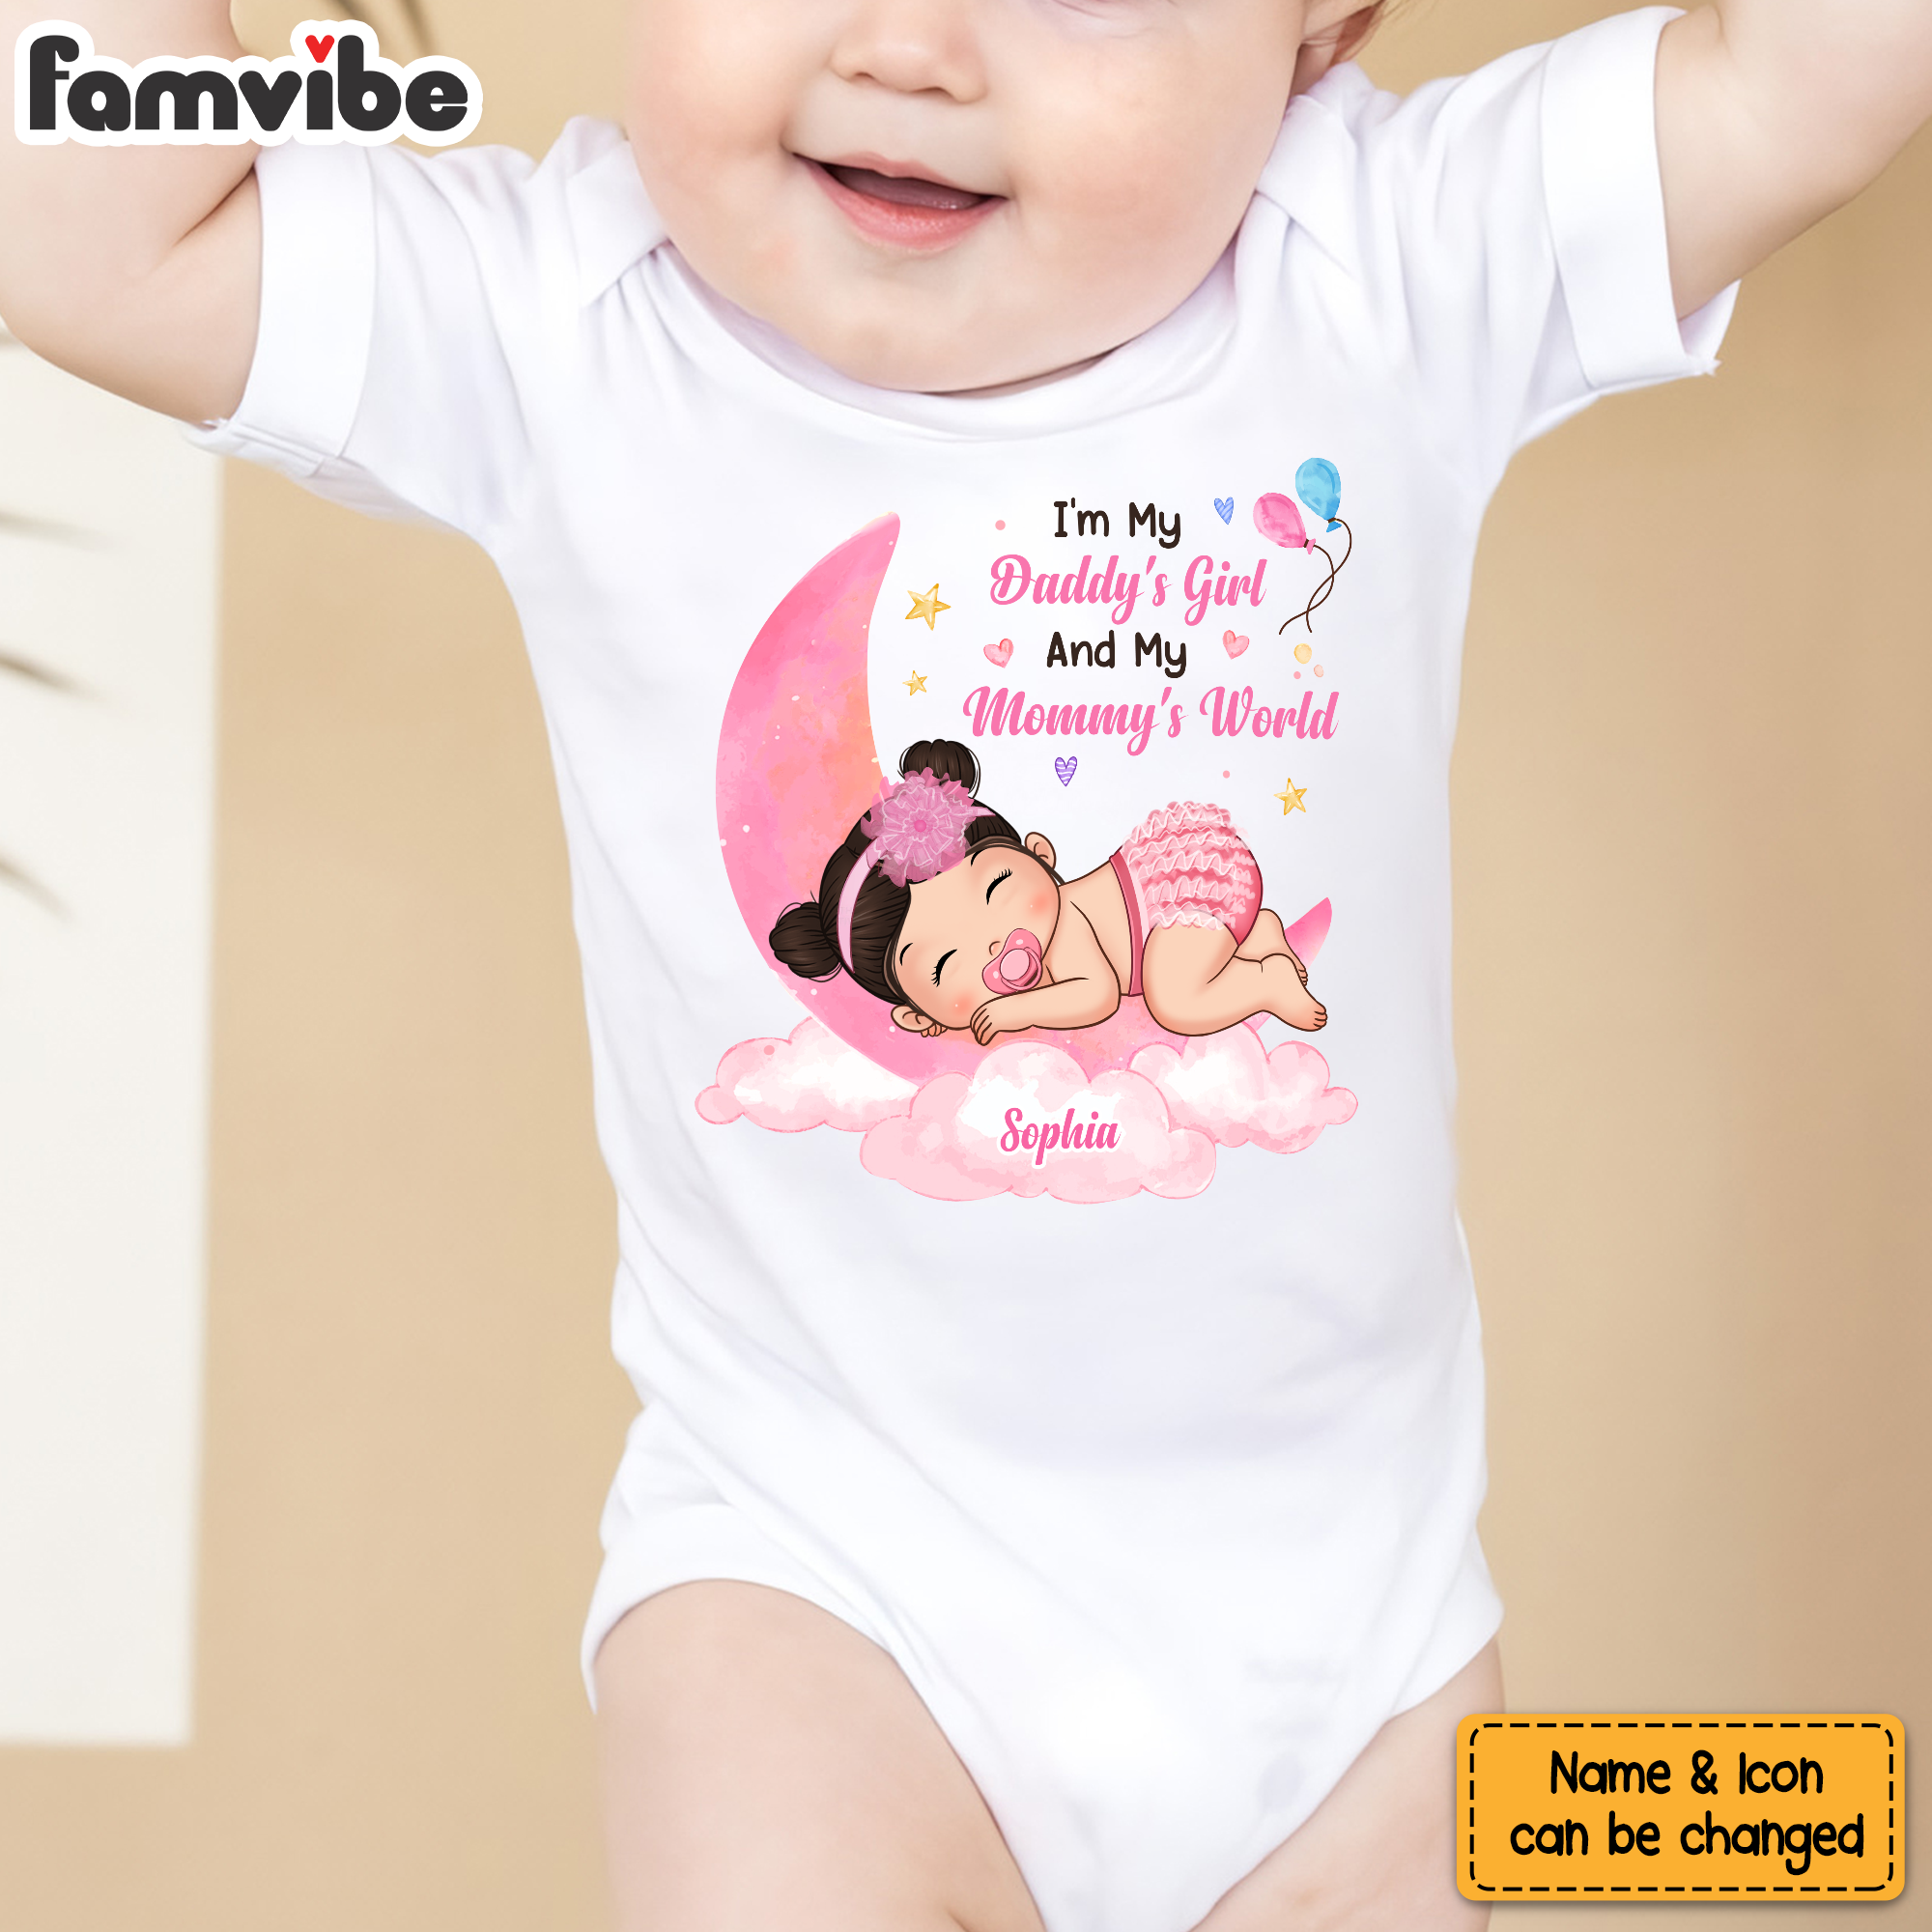 Personalized Gift For Newborn Baby Sleeping I'm My Daddy's Girl And My Mommy's World Baby Onesie 27560 Primary Mockup